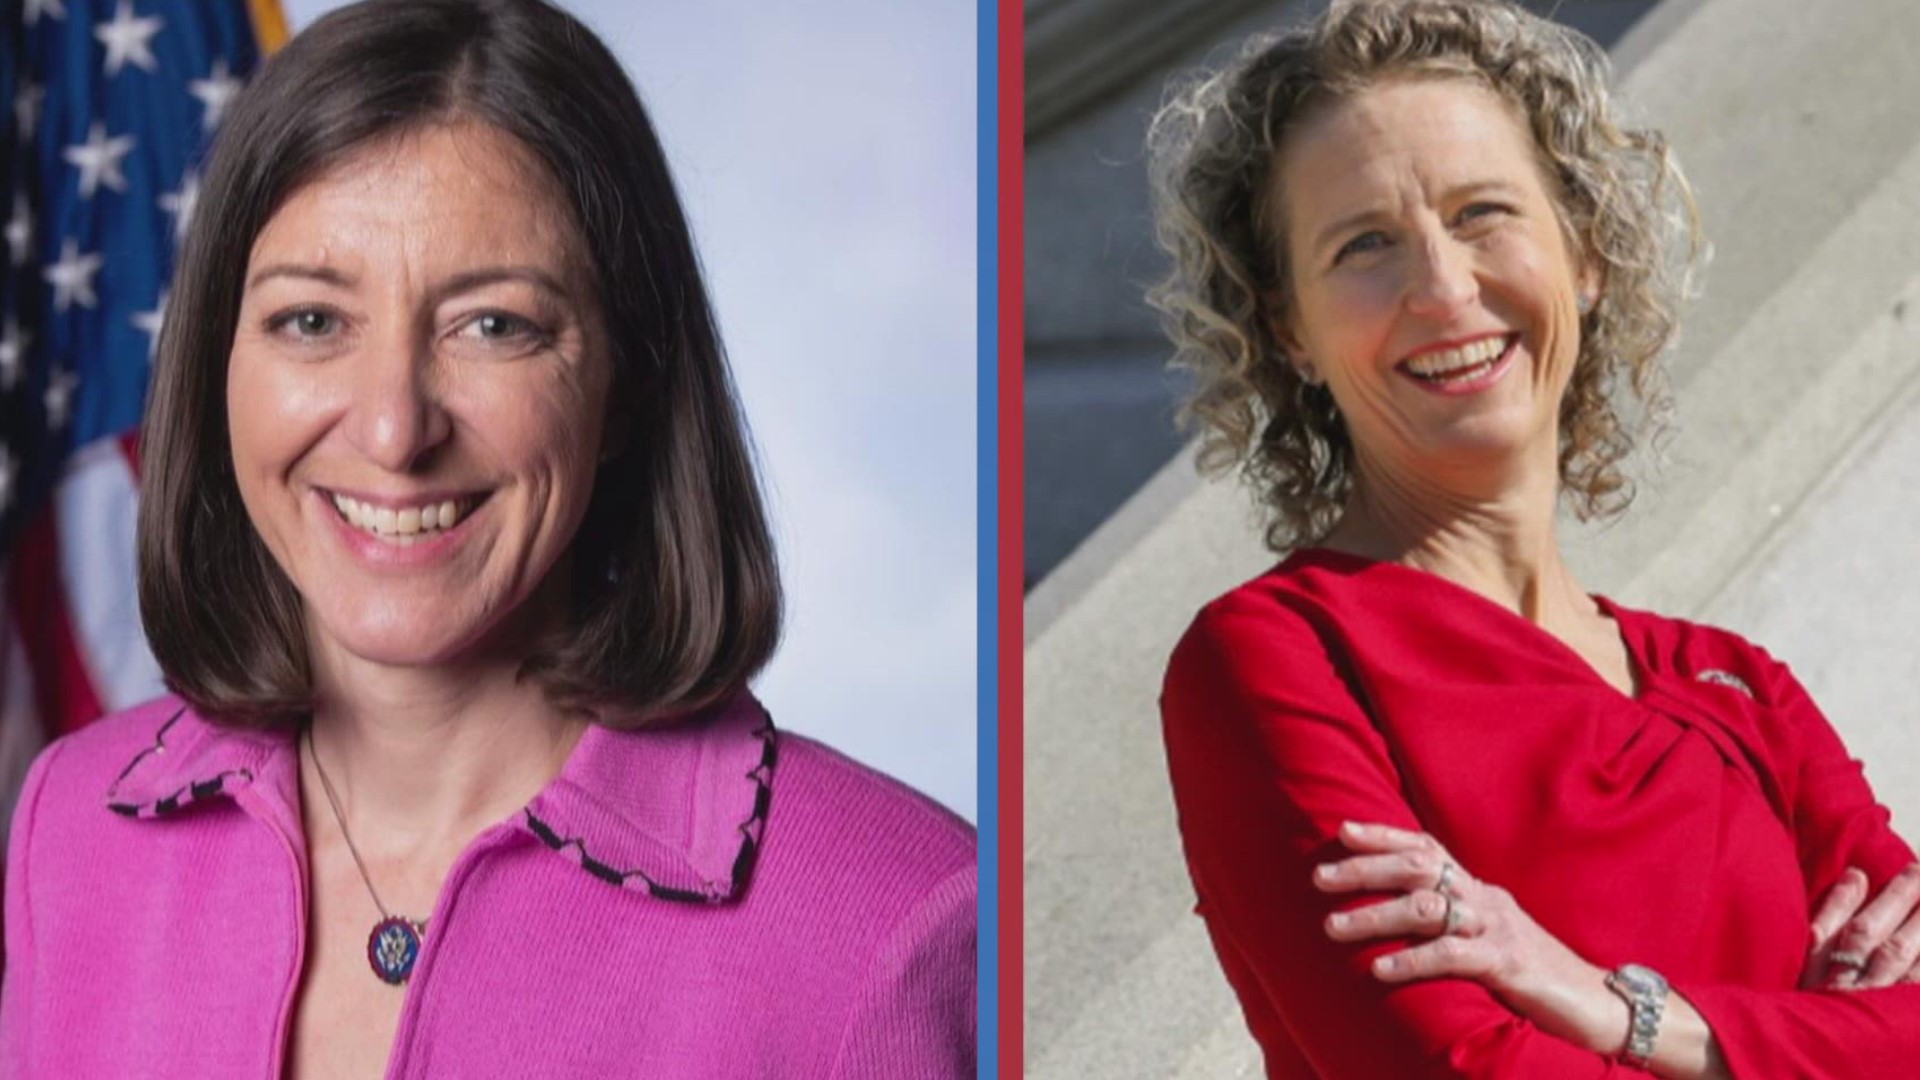 Congresswoman Elaine Luria and State Sen. Jen Kiggans debated for the first time in Virginia Beach Wednesday night.